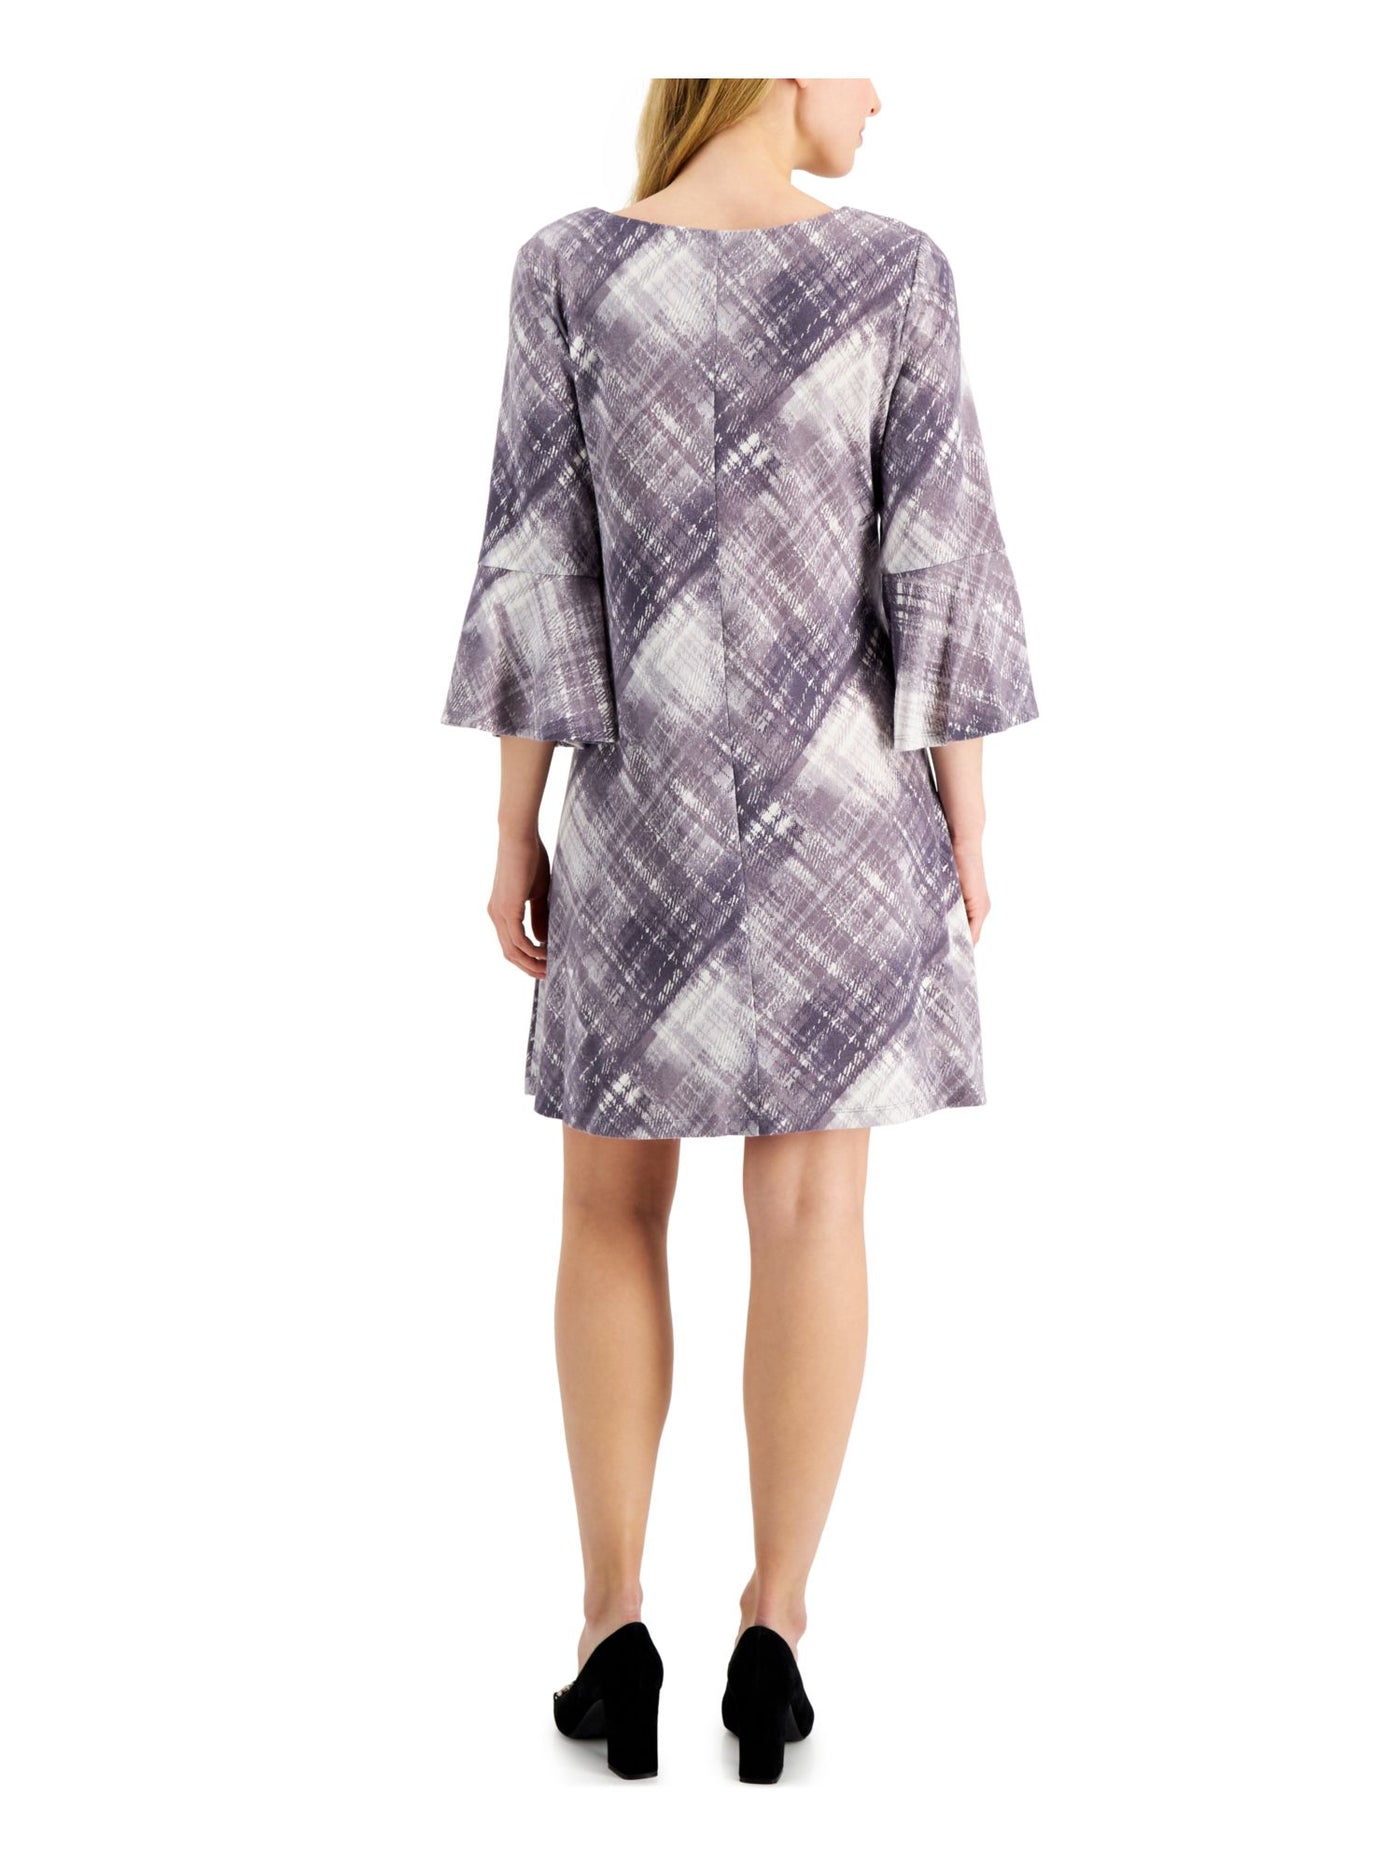 CONNECTED APPAREL Womens Purple Stretch Plaid Bell Sleeve Round Neck Short Wear To Work Fit + Flare Dress Petites 8P